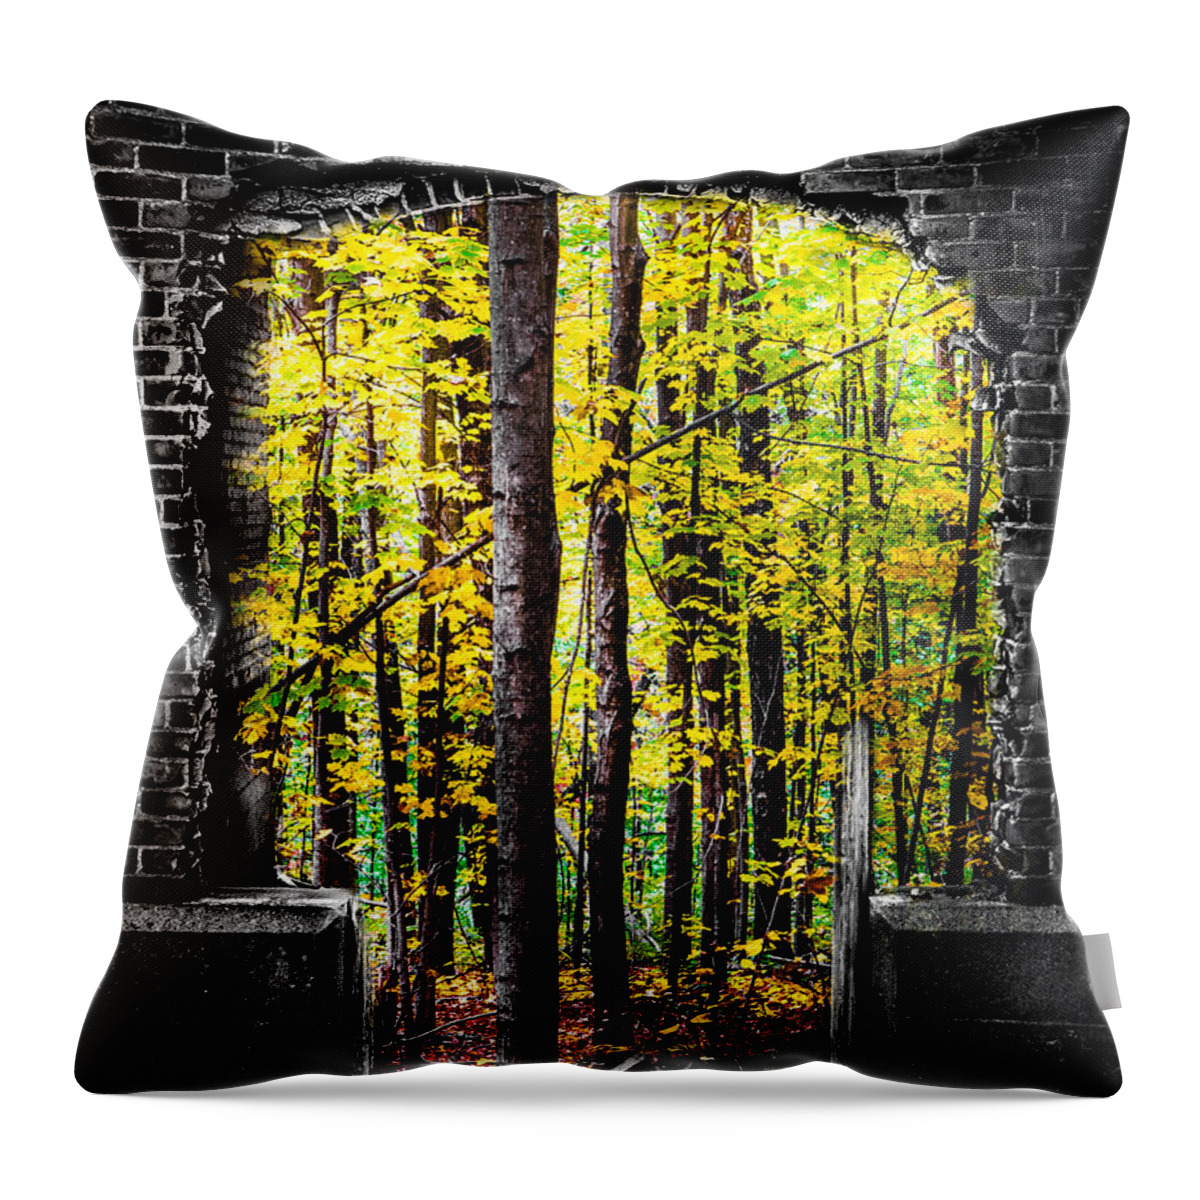 Building Throw Pillow featuring the photograph Restoration by Michael Arend